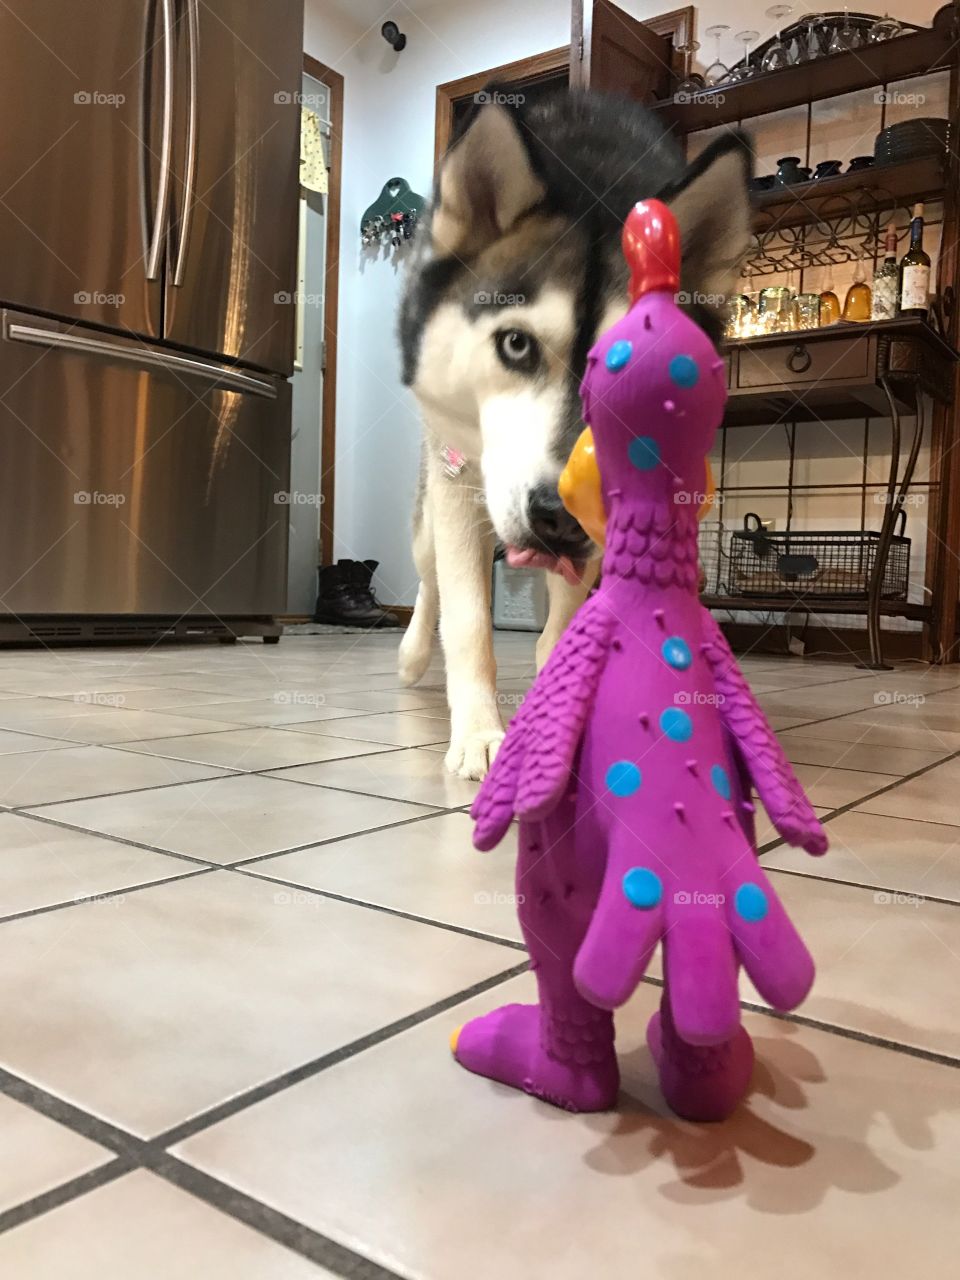 Husky and her toy rooster 